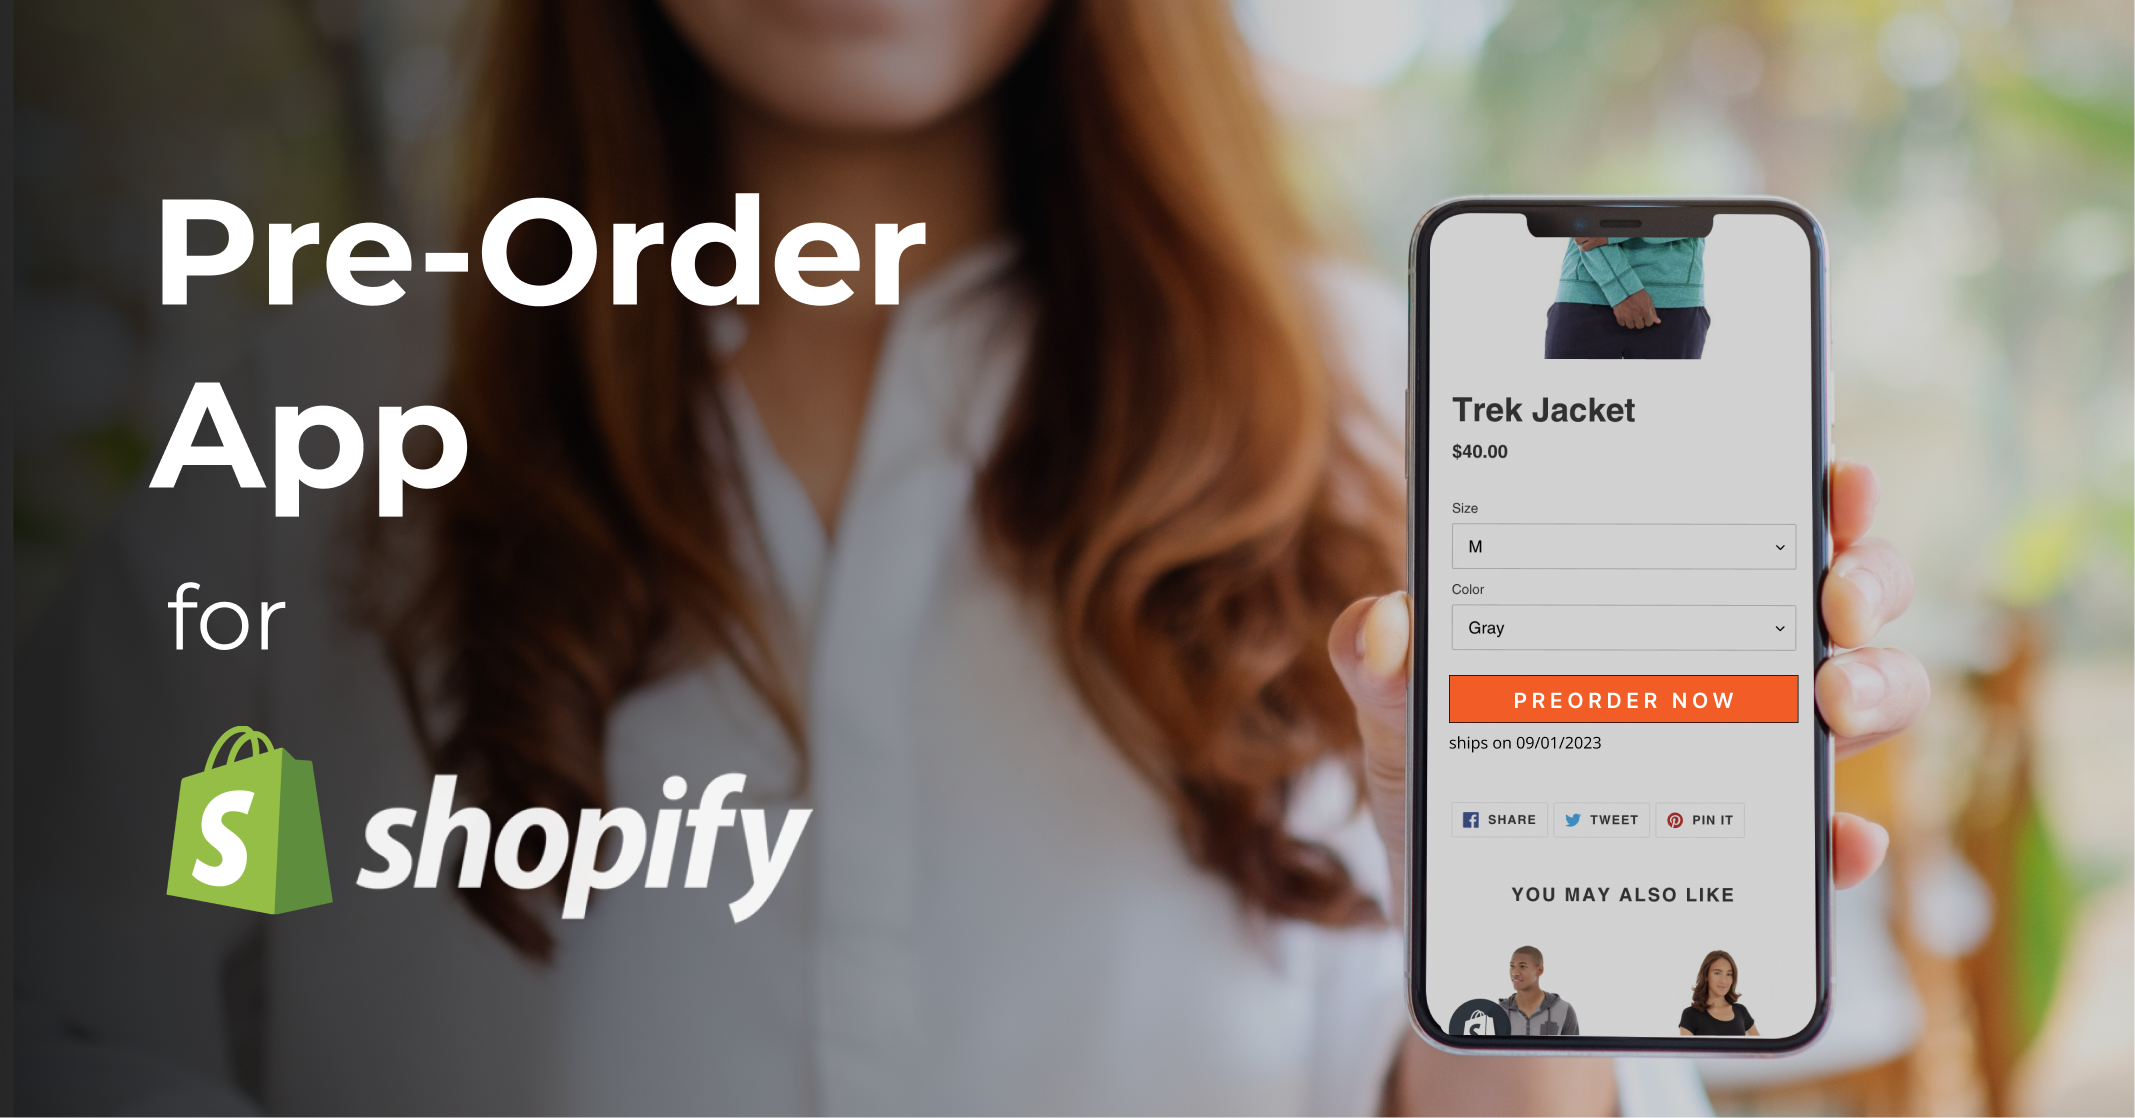 Top 7 Questions to Ask Before Buying a Pre-Order App for Shopify